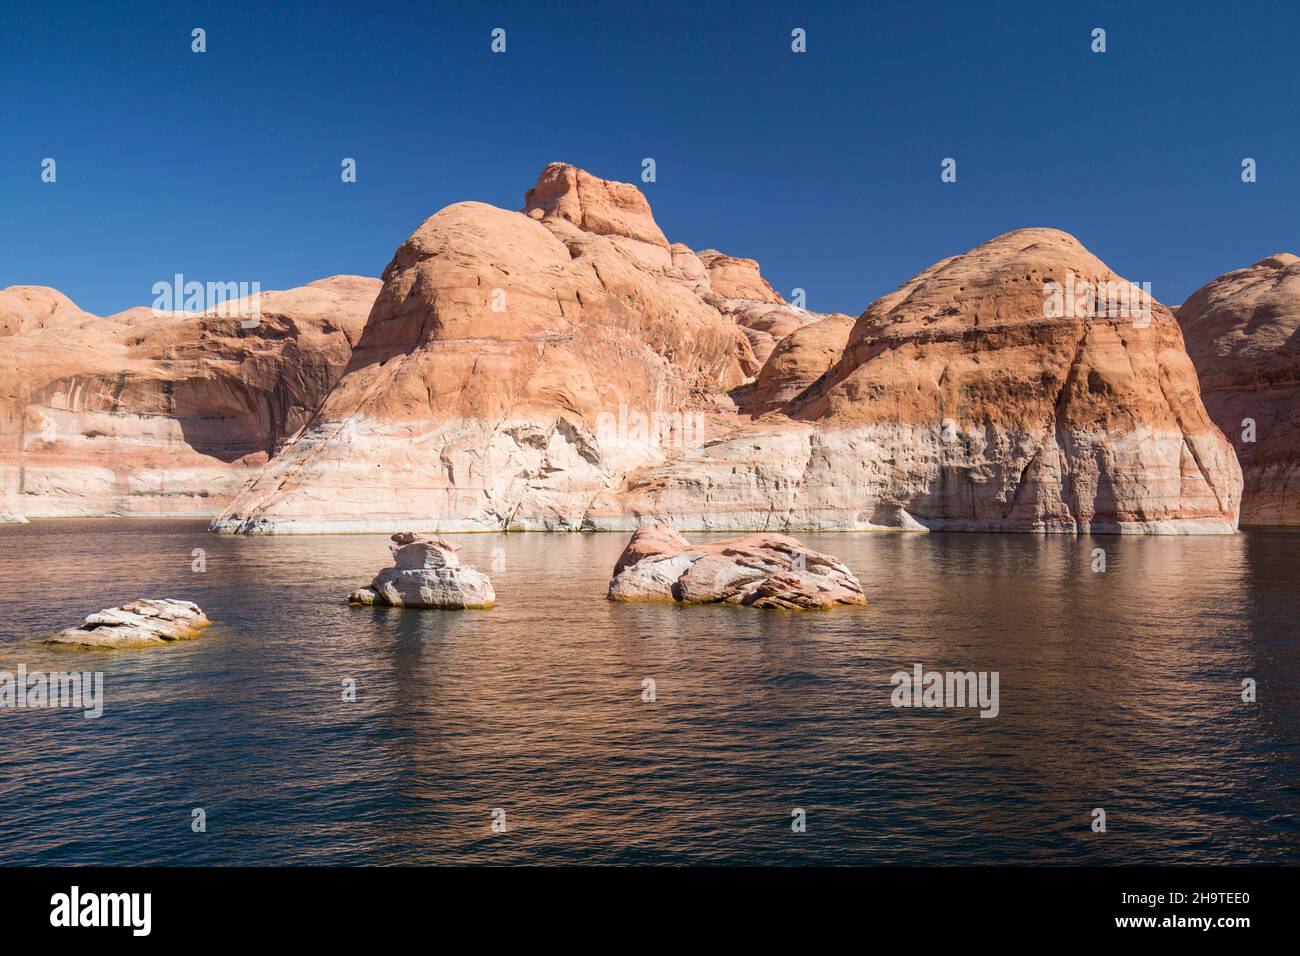 Glen Canyon National Recreation Area, Utah, USA. Sandstone cliffs refected in the tranquil waters of Forbidding Canyon, a narrow arm of Lake Powell. Stock Photo